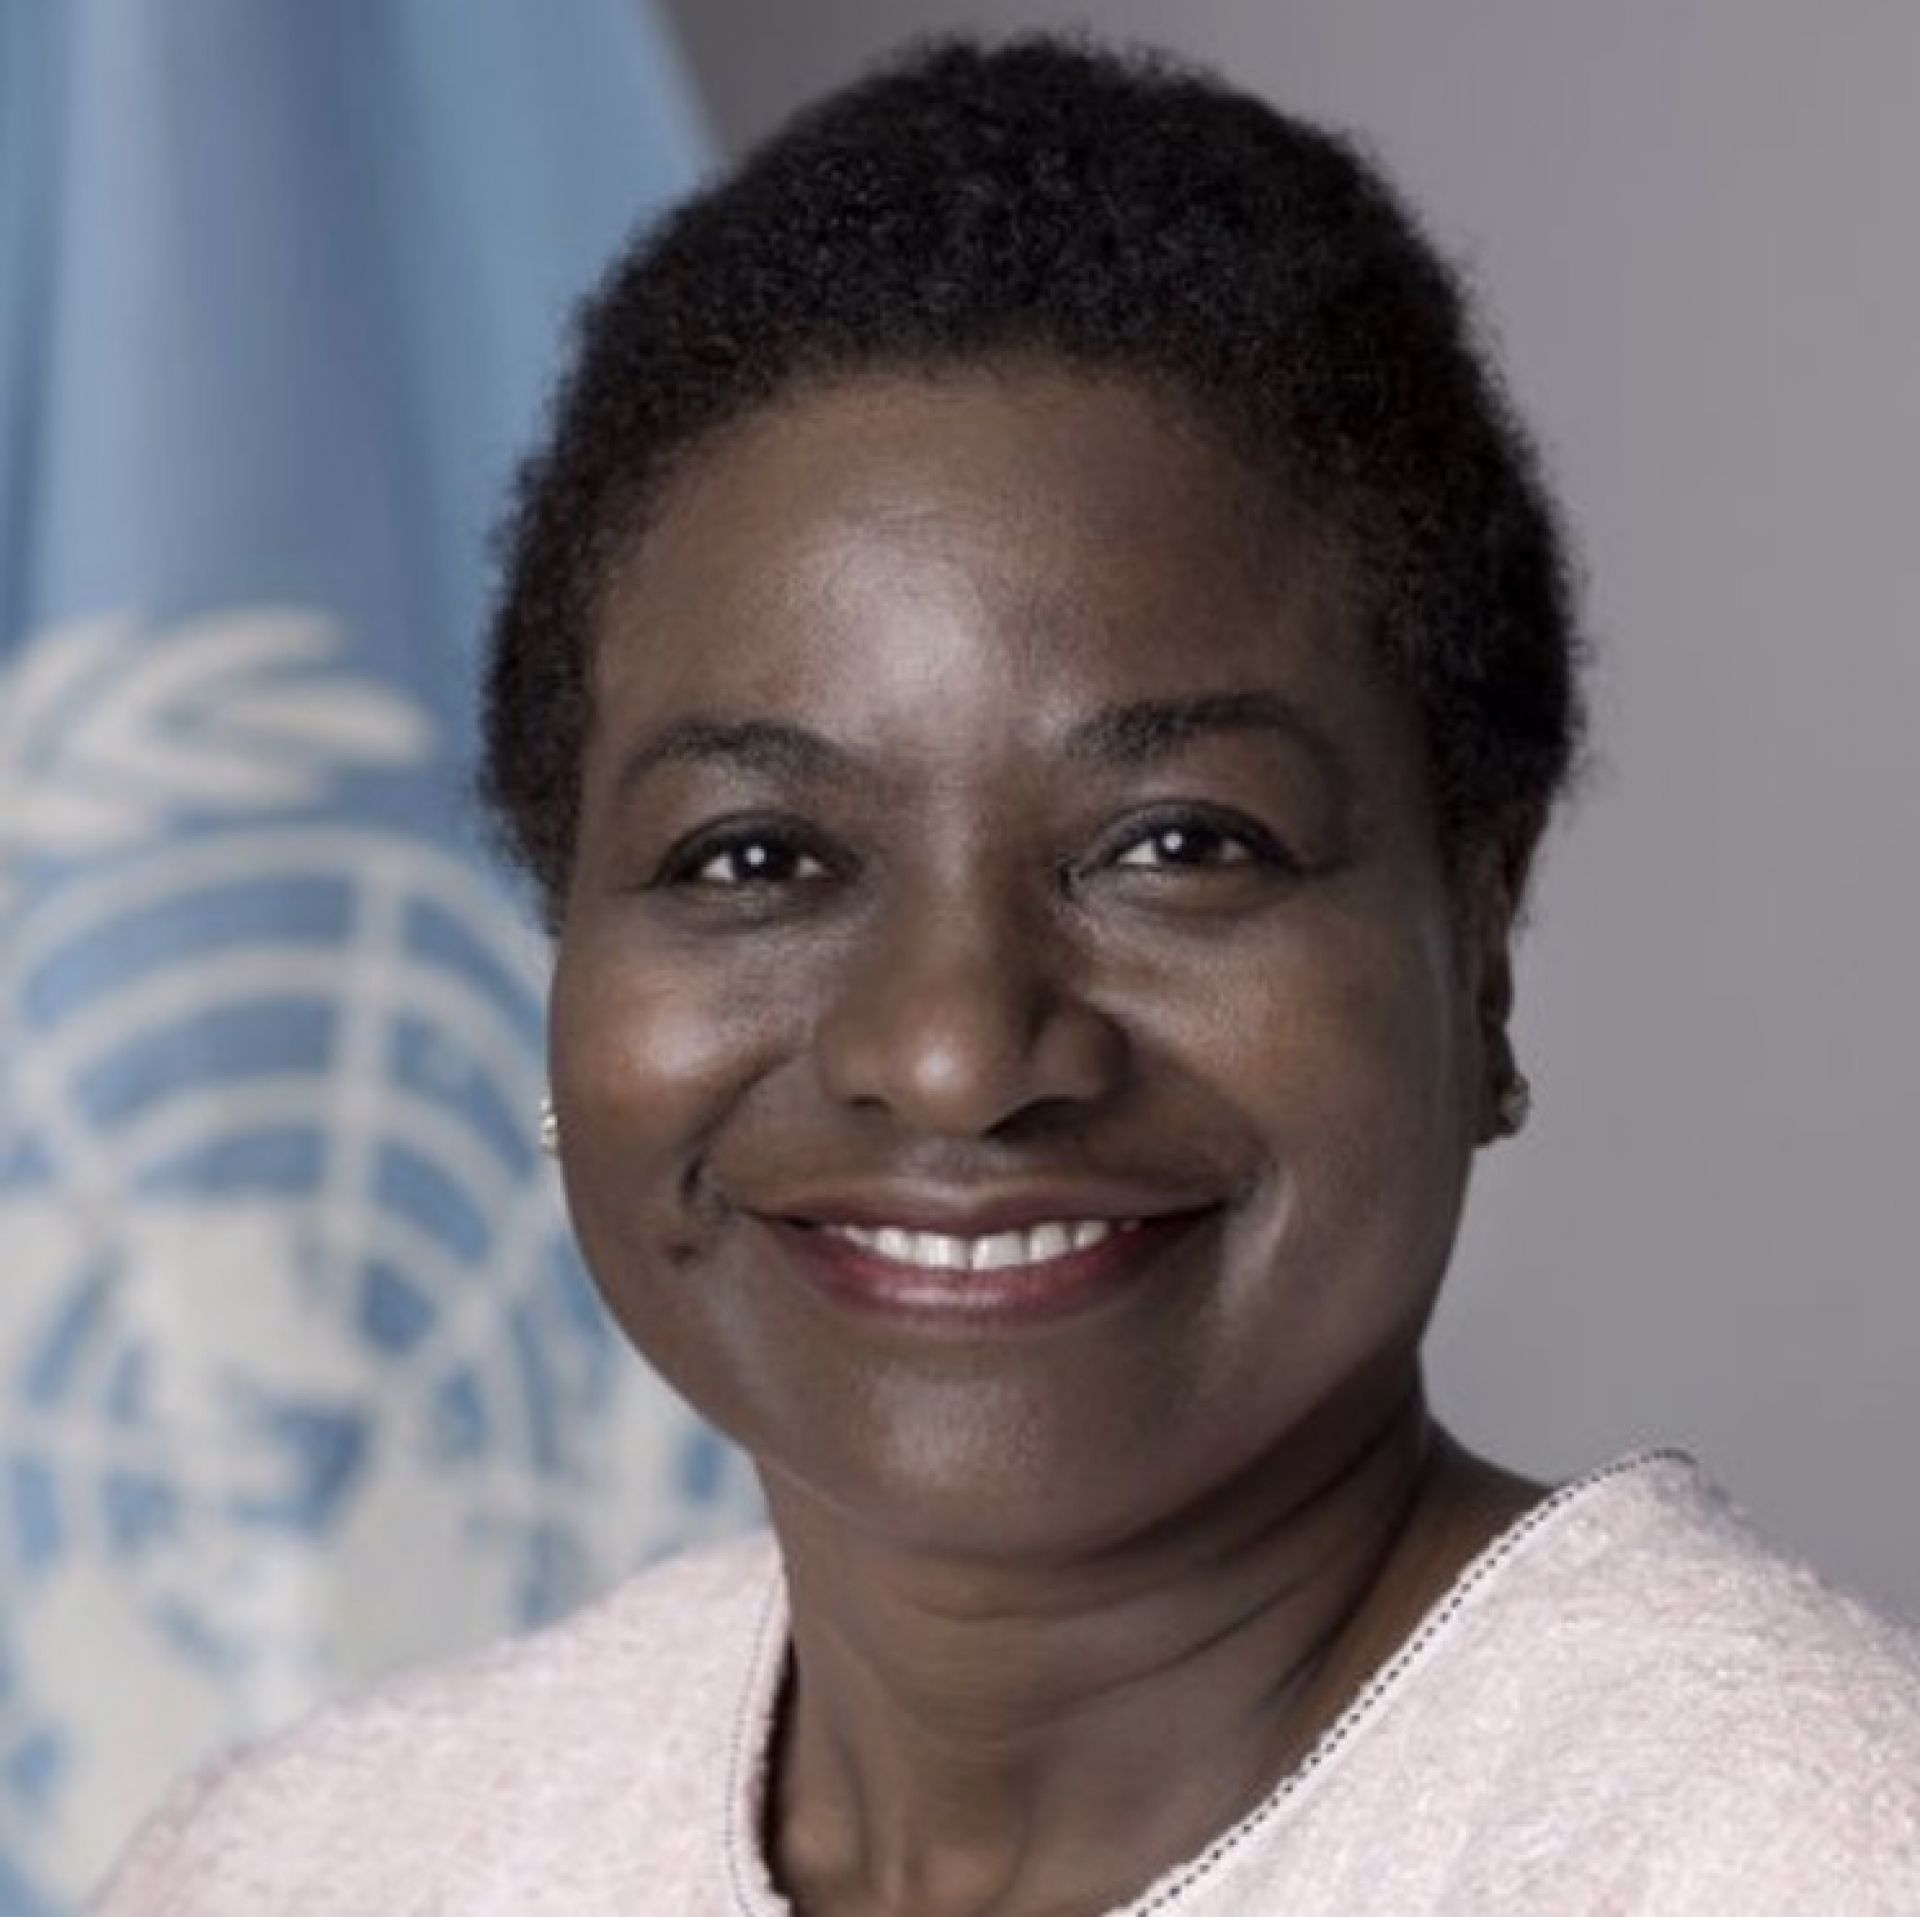 empower-girls-before,-during-and-after-crises-statement-of-unfpa-executive-director-dr-natalia-kanem-for-the-international-day-of-the-girl-child-11-october-2017